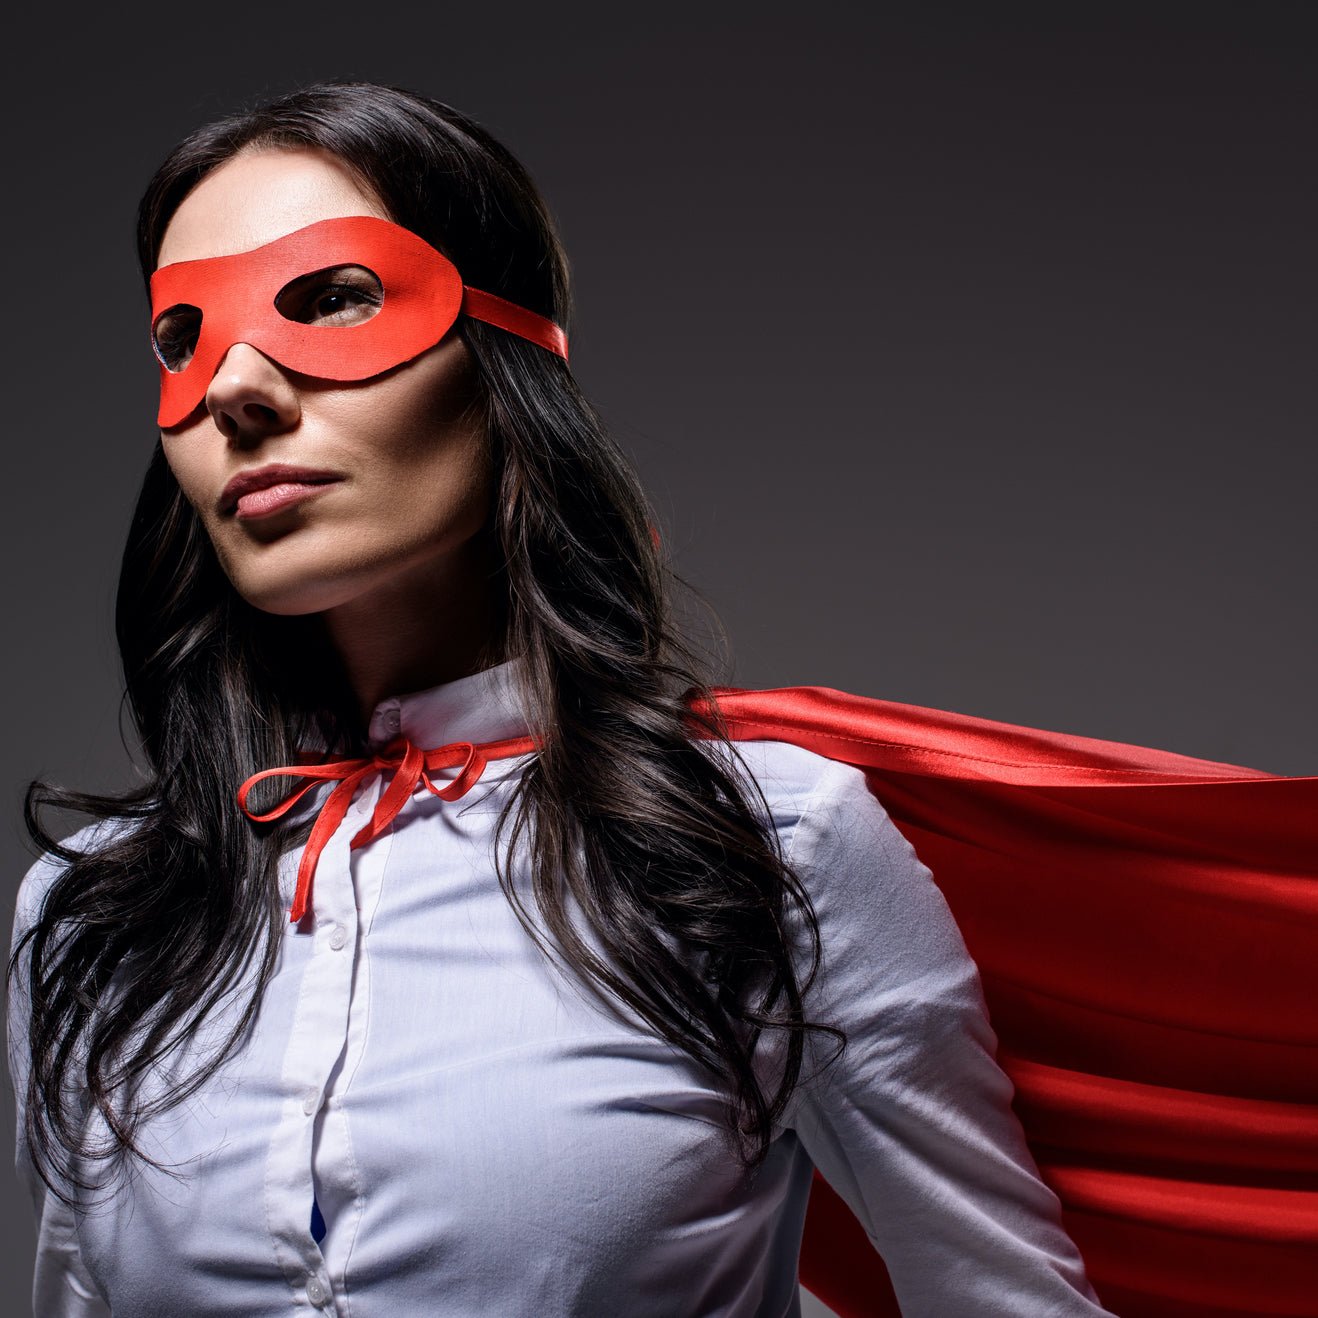 What Would Your Zodiac Sign’s Superpower Be?